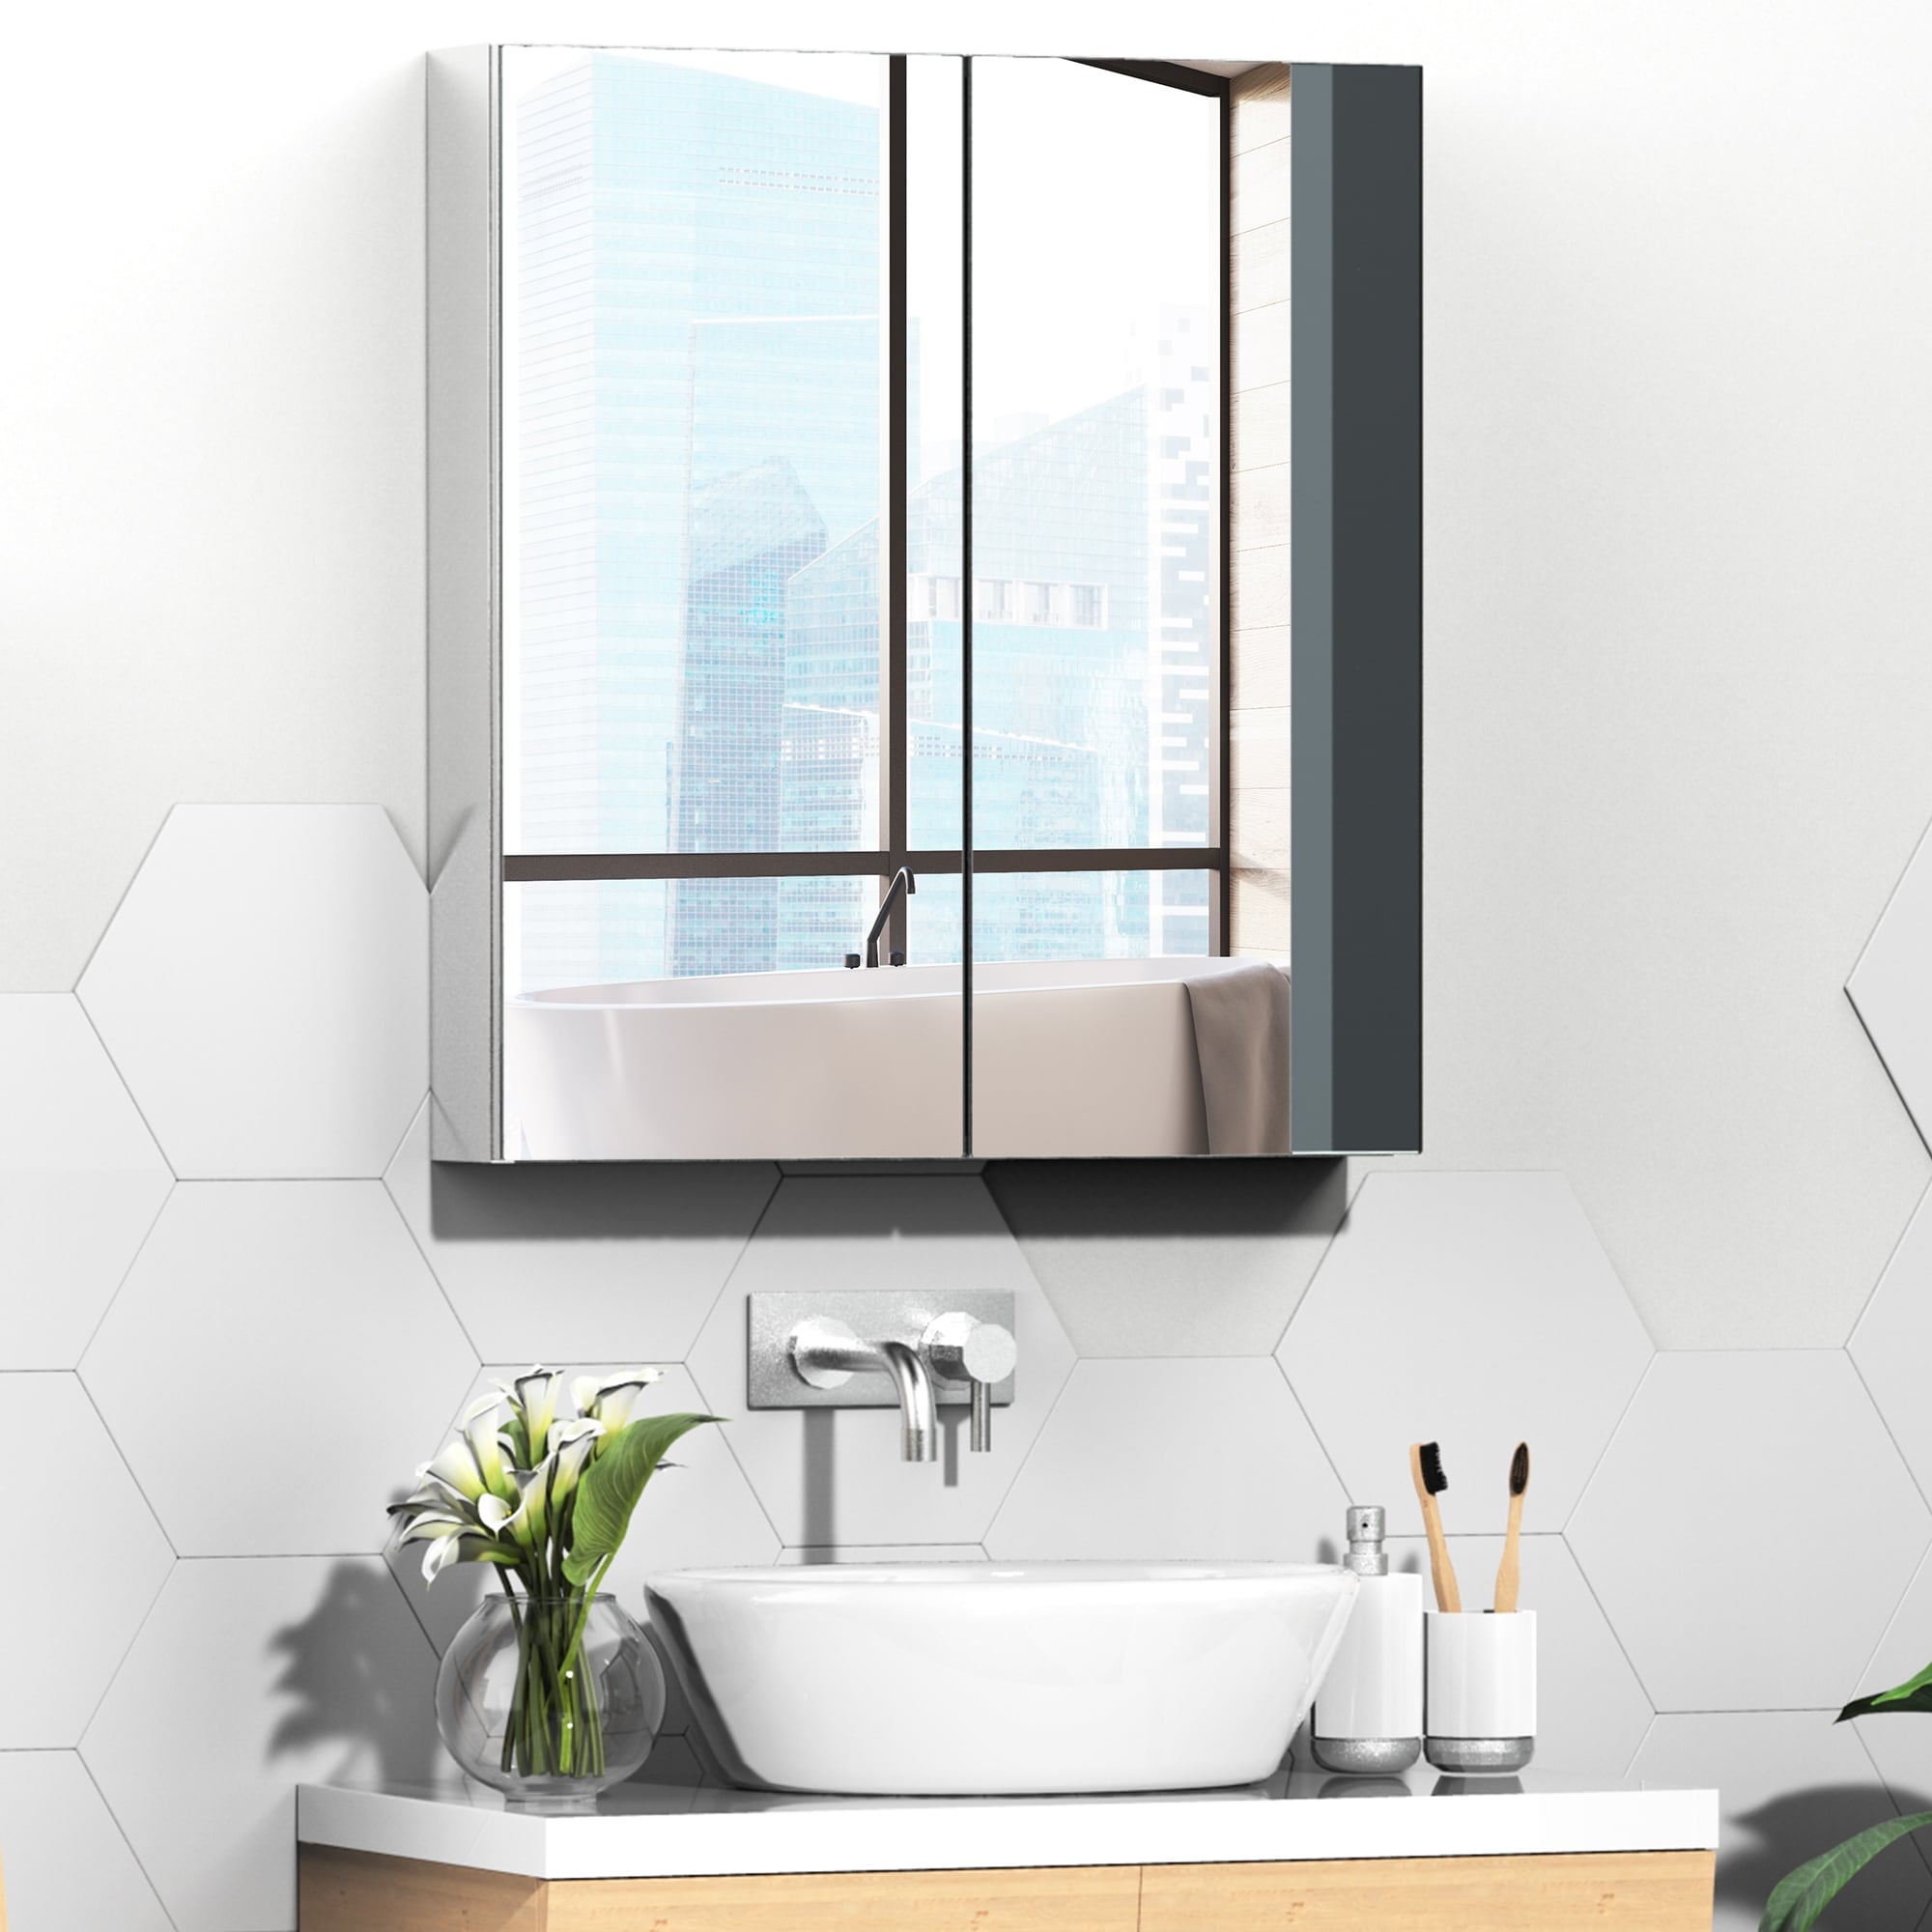 https://ak1.ostkcdn.com/images/products/is/images/direct/5ce296c2ac623d6ff7f9498368a5426081f4df1c/kleankin-Stainless-Steel-Wall-Mount-Bathroom-Medicine-Cabinet-with-Mirror-Storage-Organizer-Double-Doors%2C-Silver.jpg